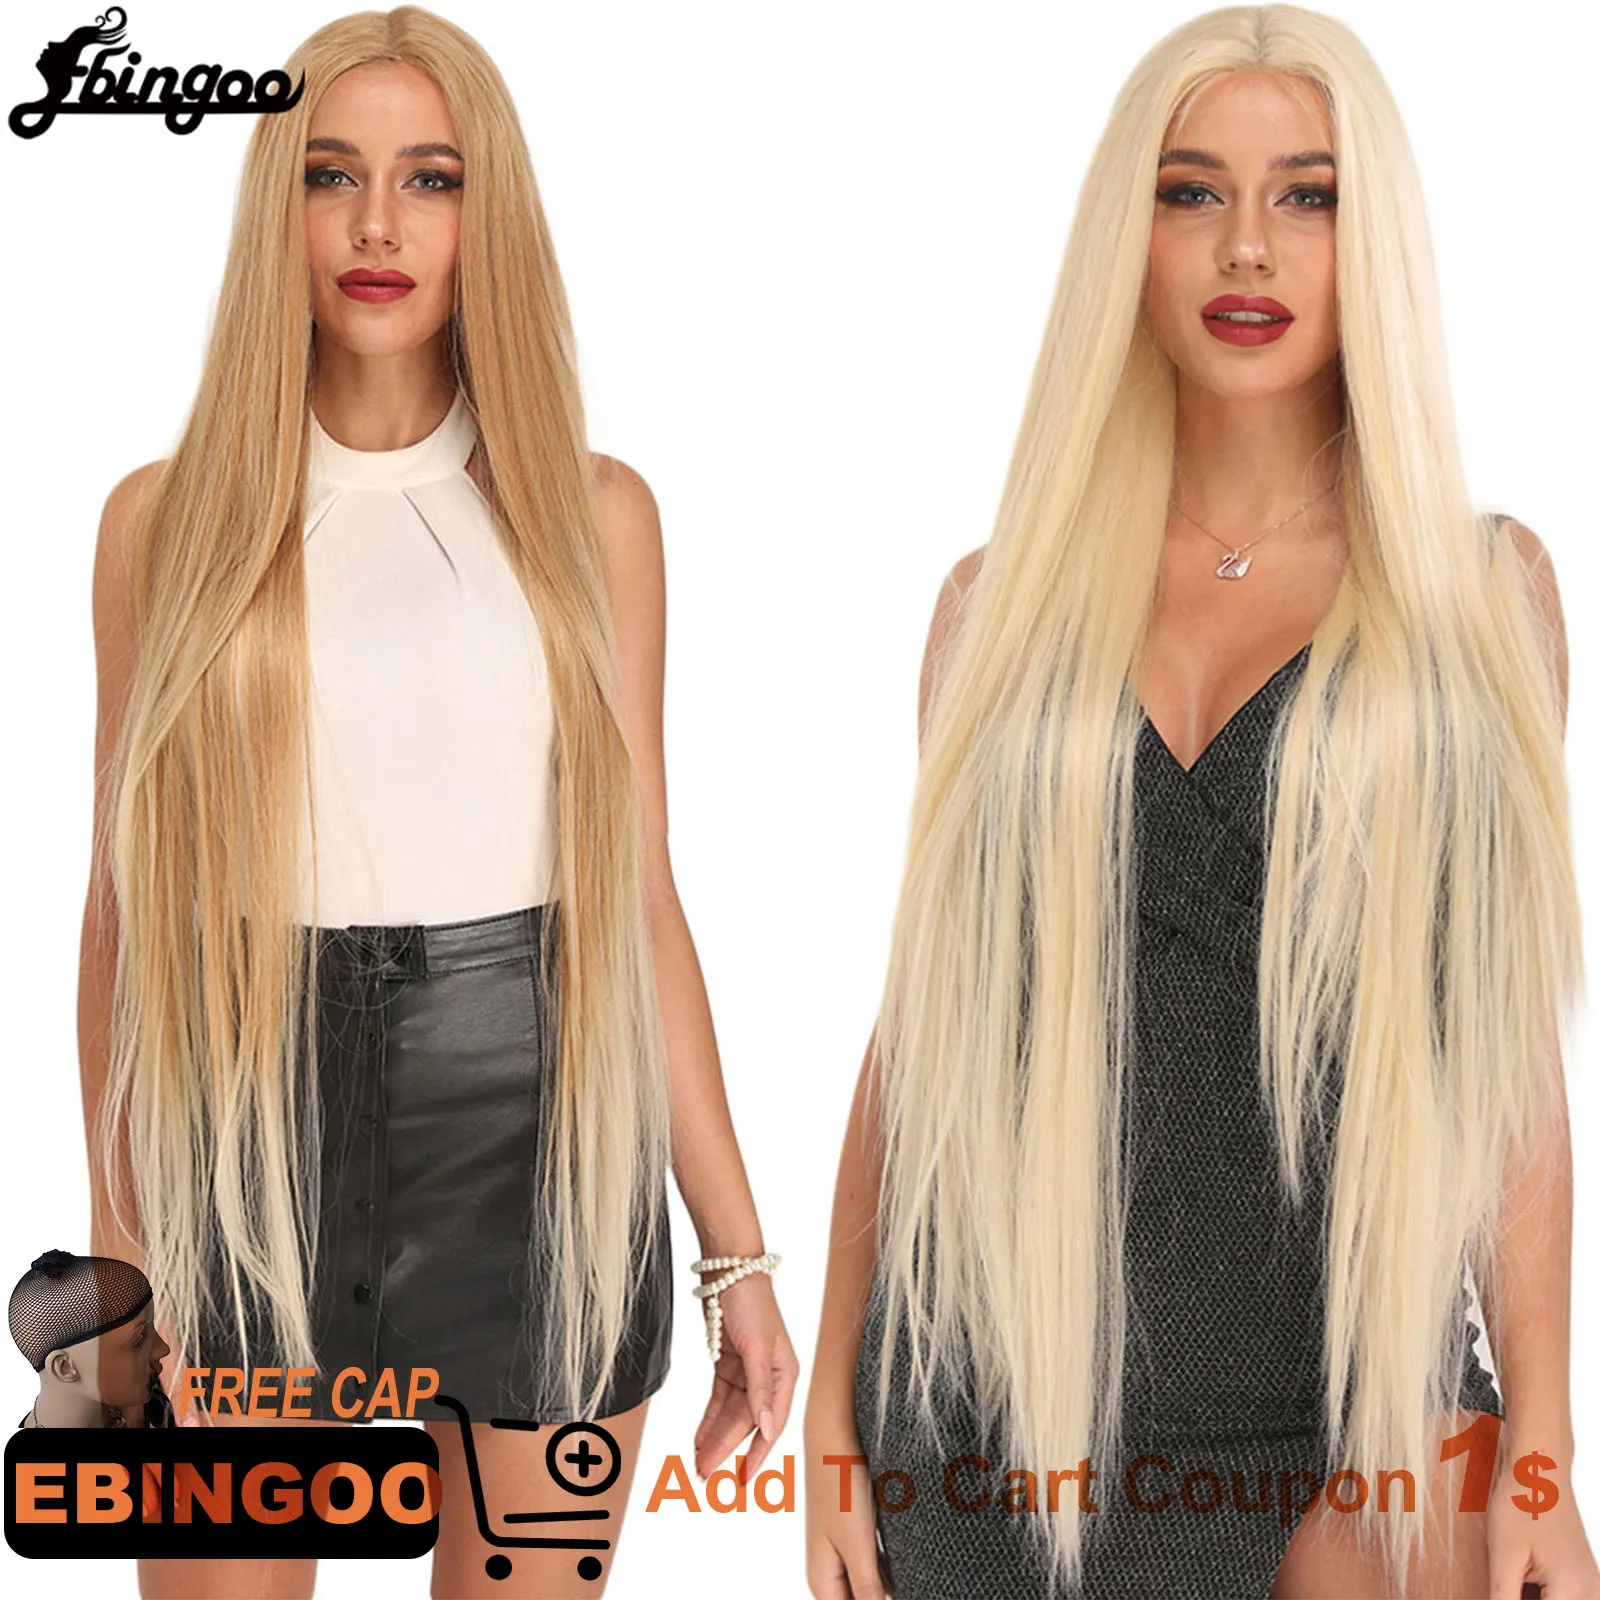 Ebingoo Synthetic Futura Lace Front Wig 40Inch Long Straight Patinum 613 Blonde Burgundy Heat Resistant Fiber Hair Wig for Women